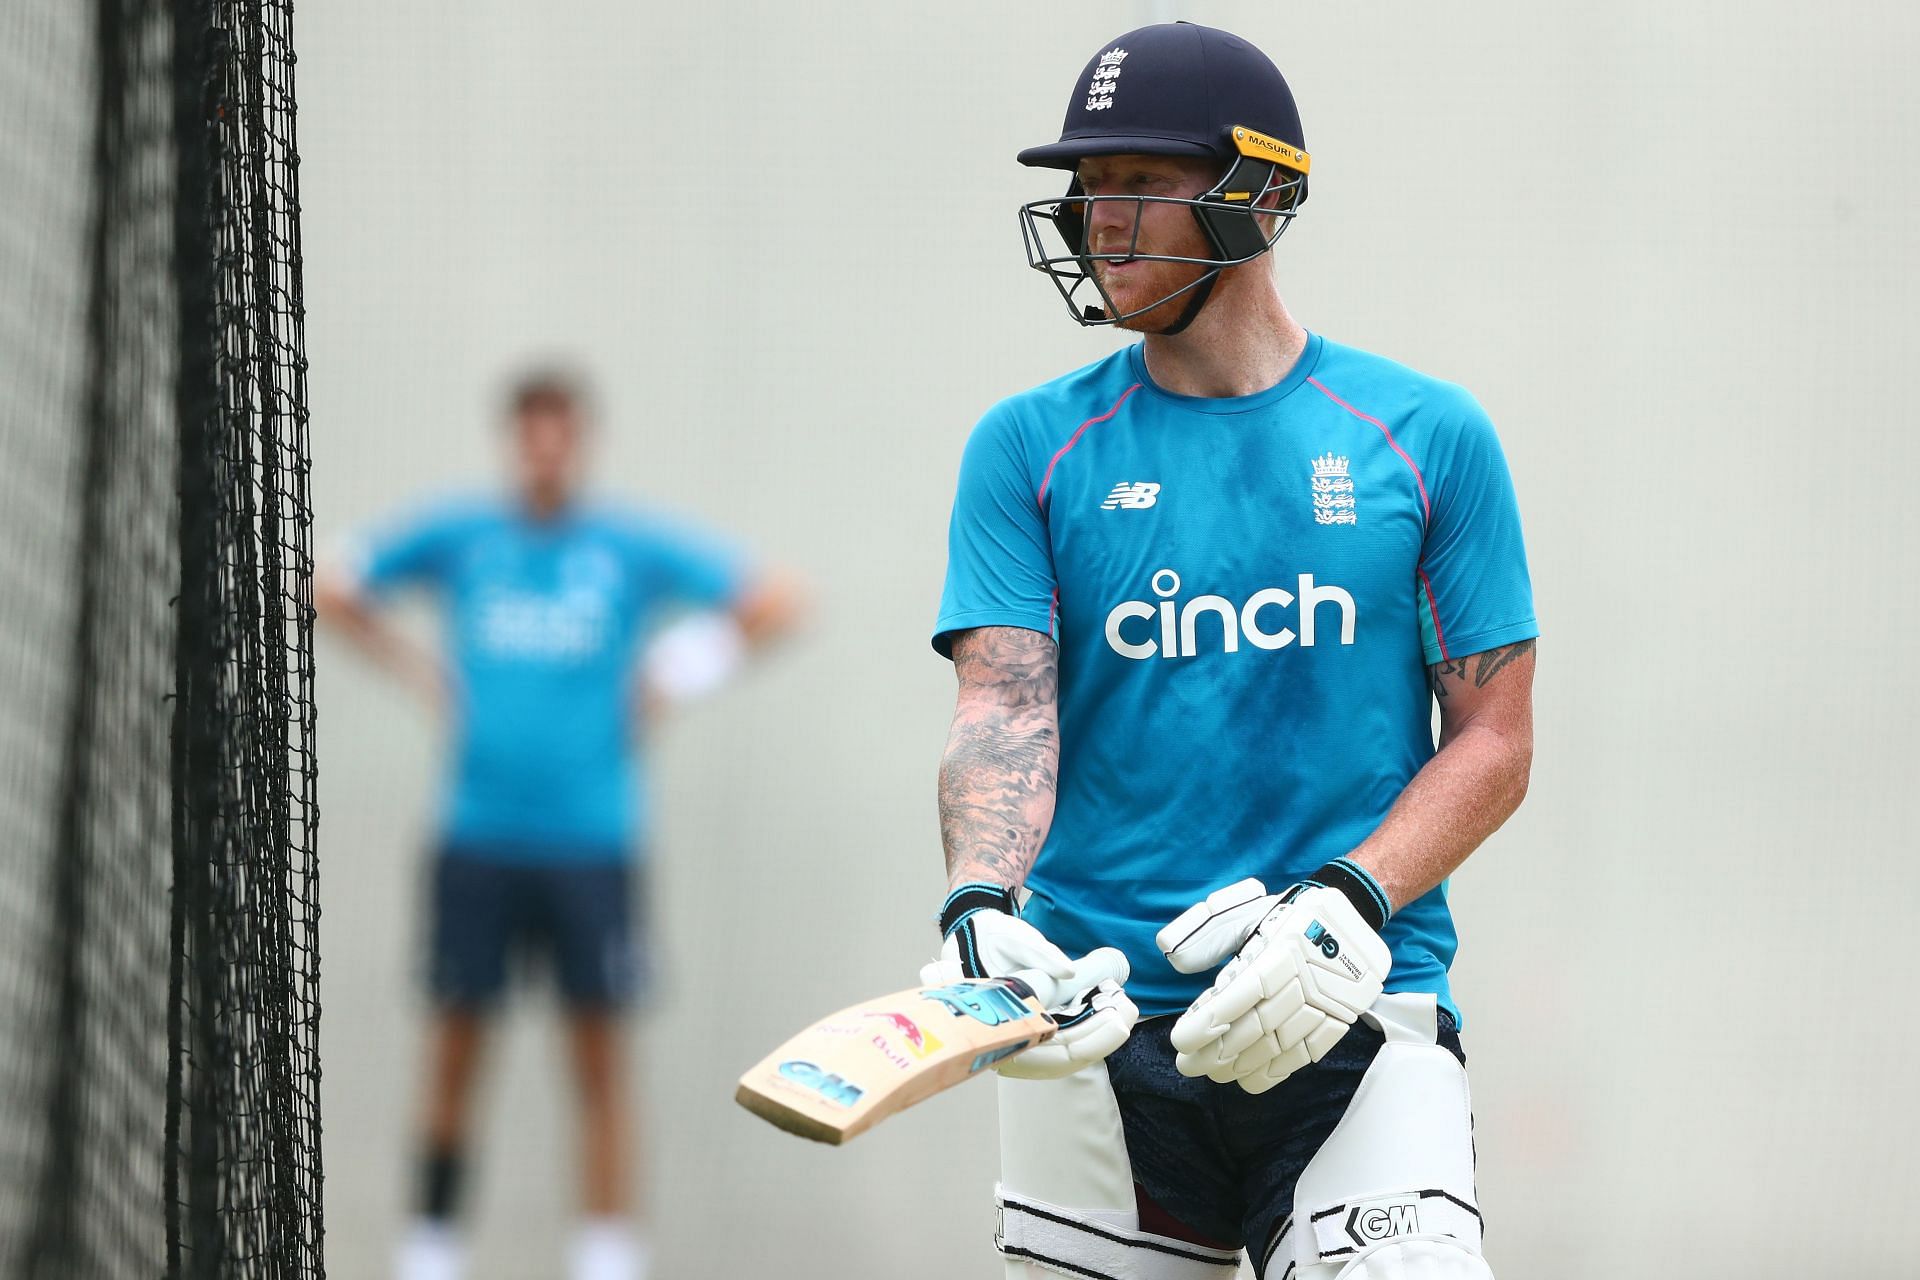 Ben Stokes will return to international cricket after a long haul (Credit: Getty Images)